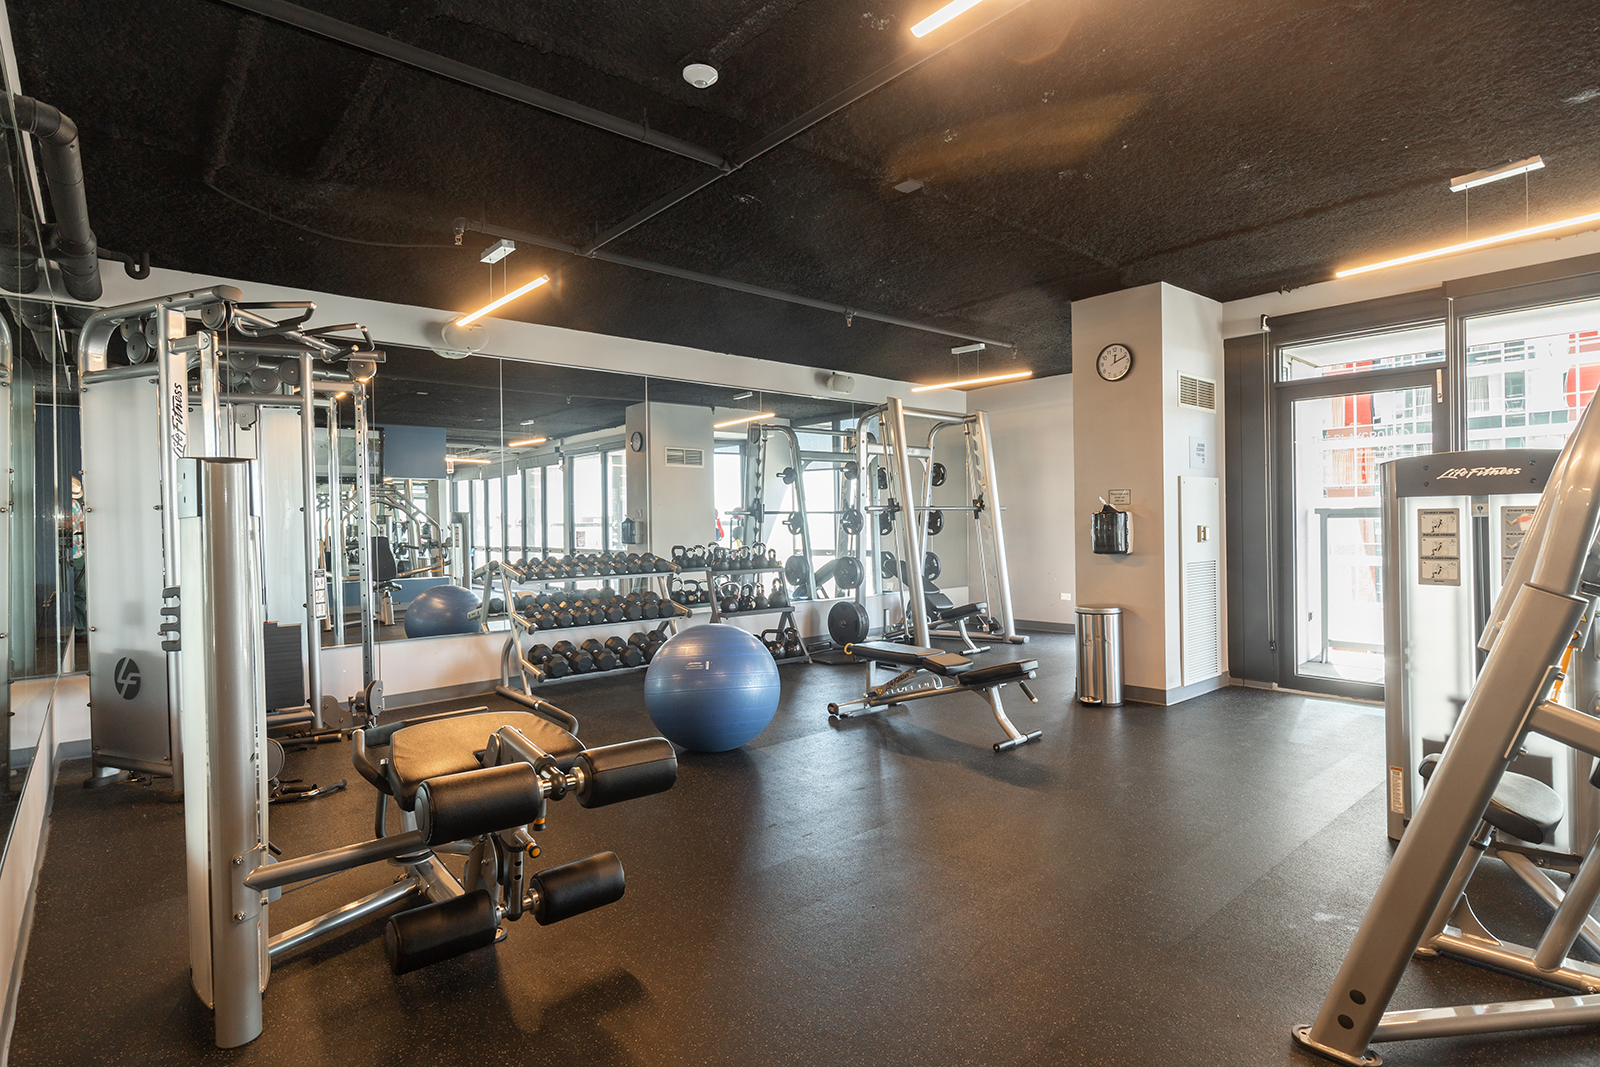 arrive-lex-luxury-apartment-homes-for-rent-chicago-il-60616-fitness-center-weights